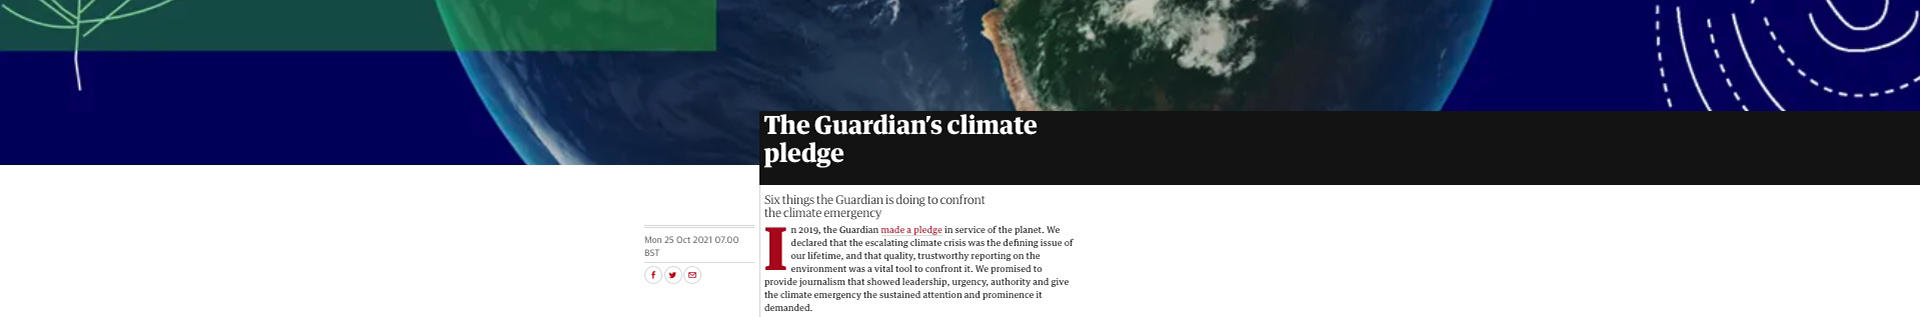 image of the guardian masthead online (featuring its climate pledge)